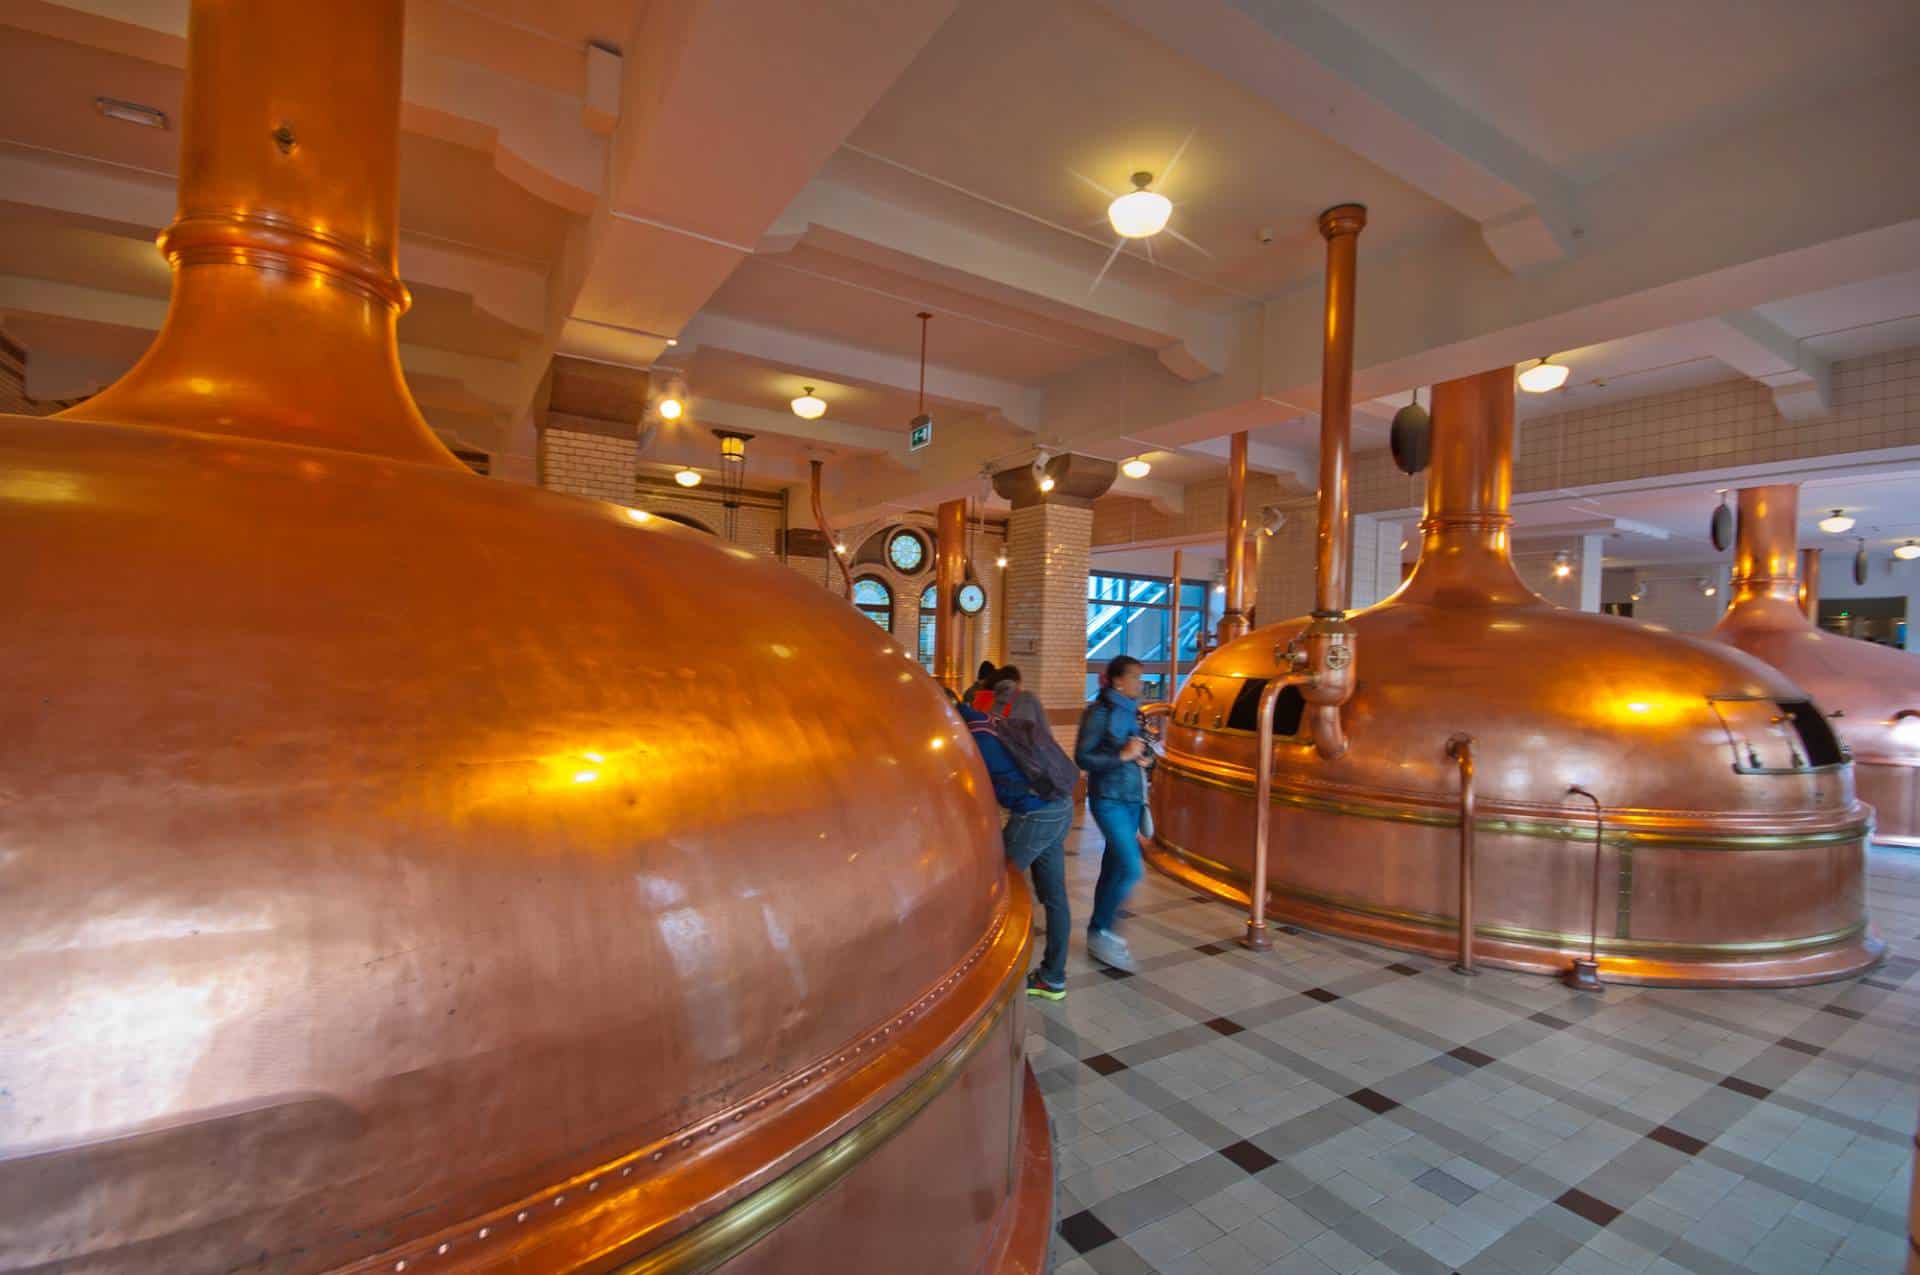 Where are the Top Brewery Tours of Europe?